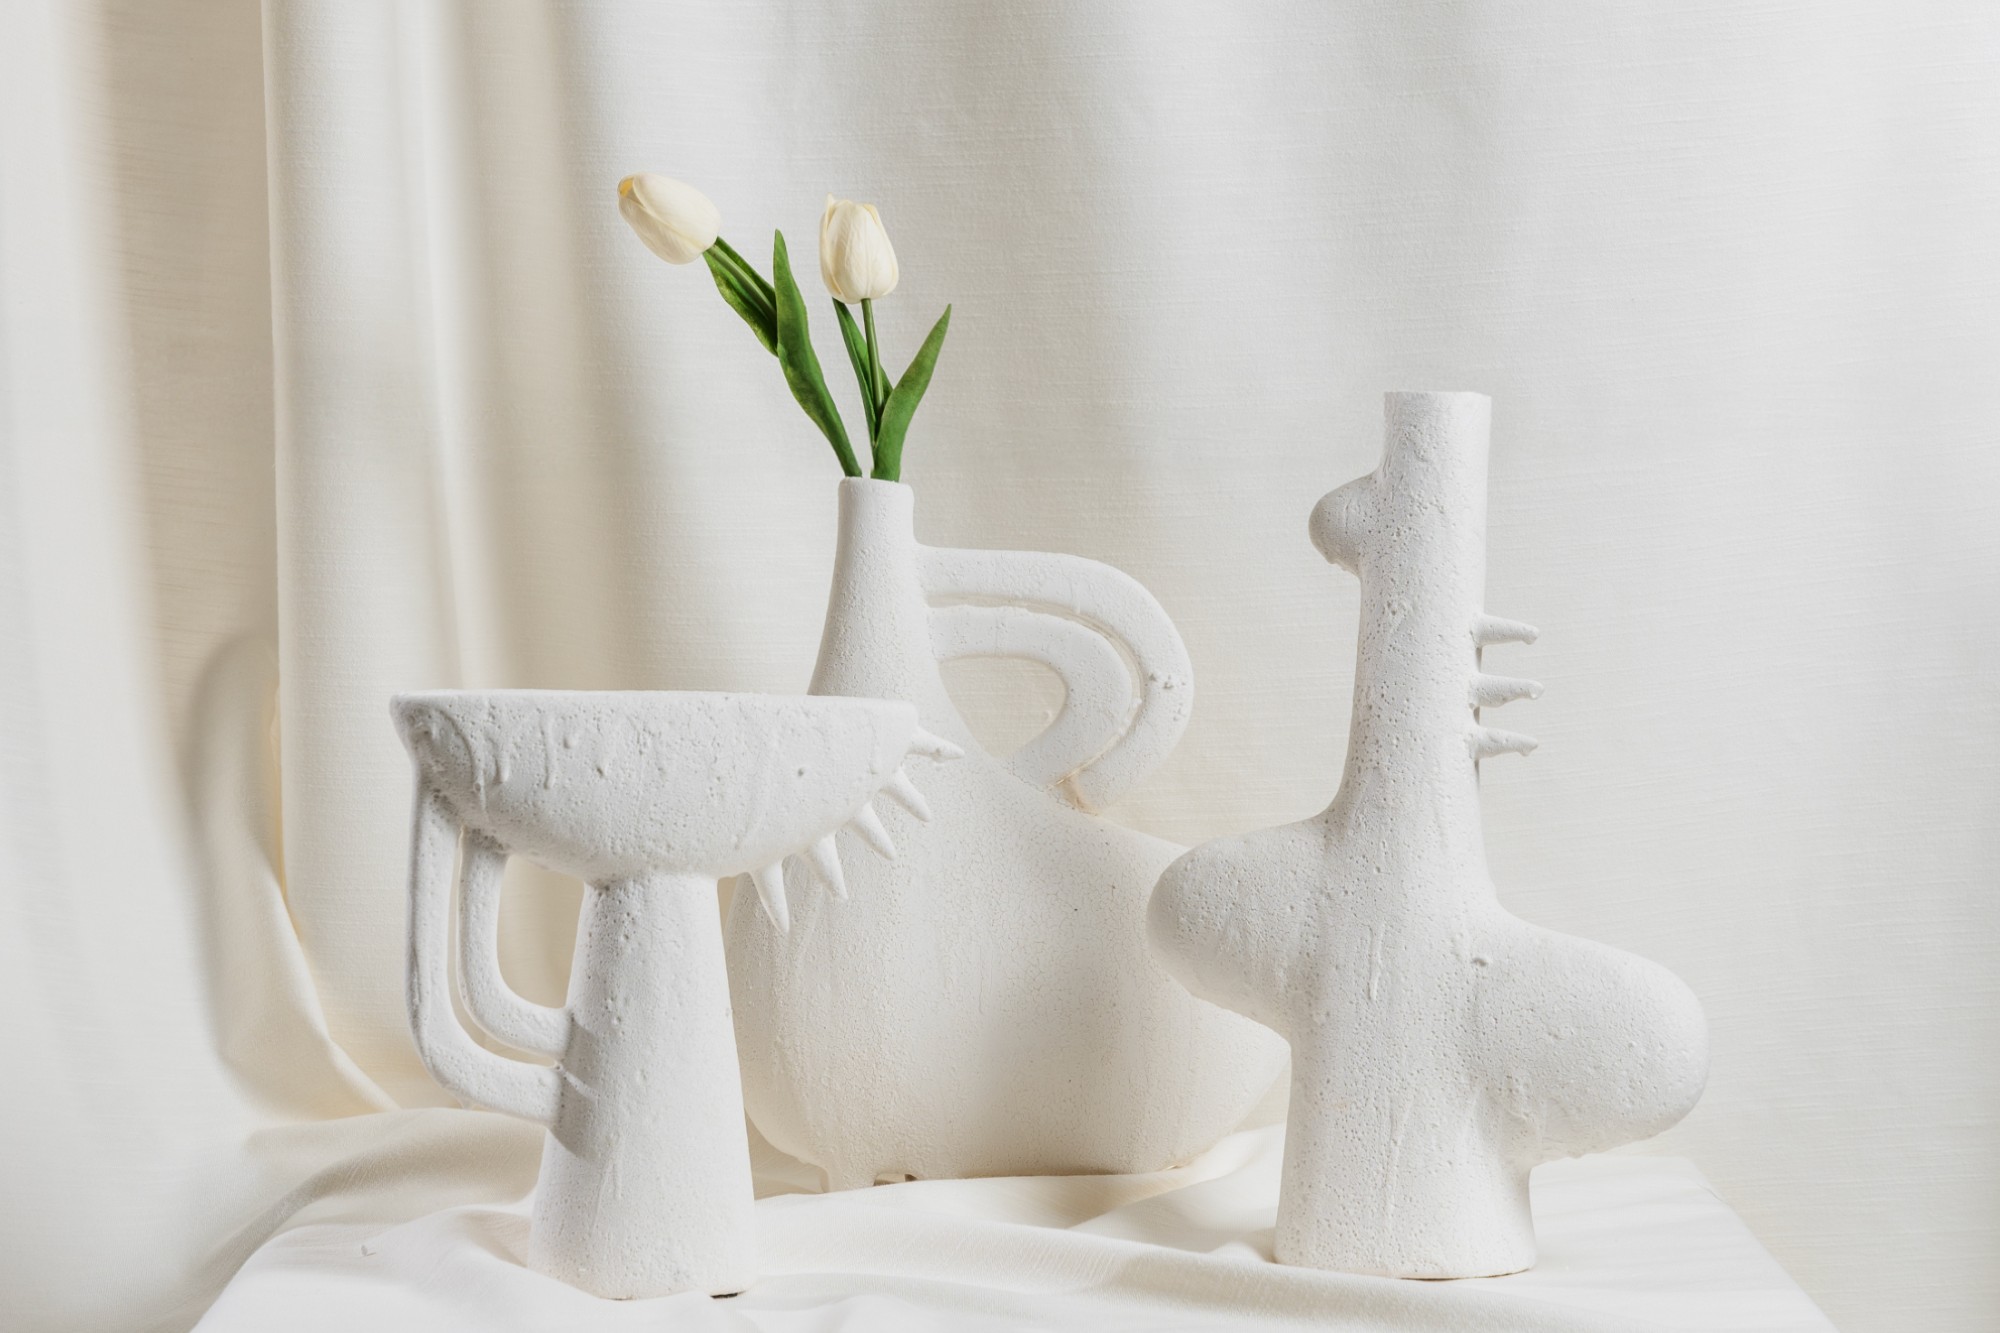 Maison by Nirmals introduces vase collection